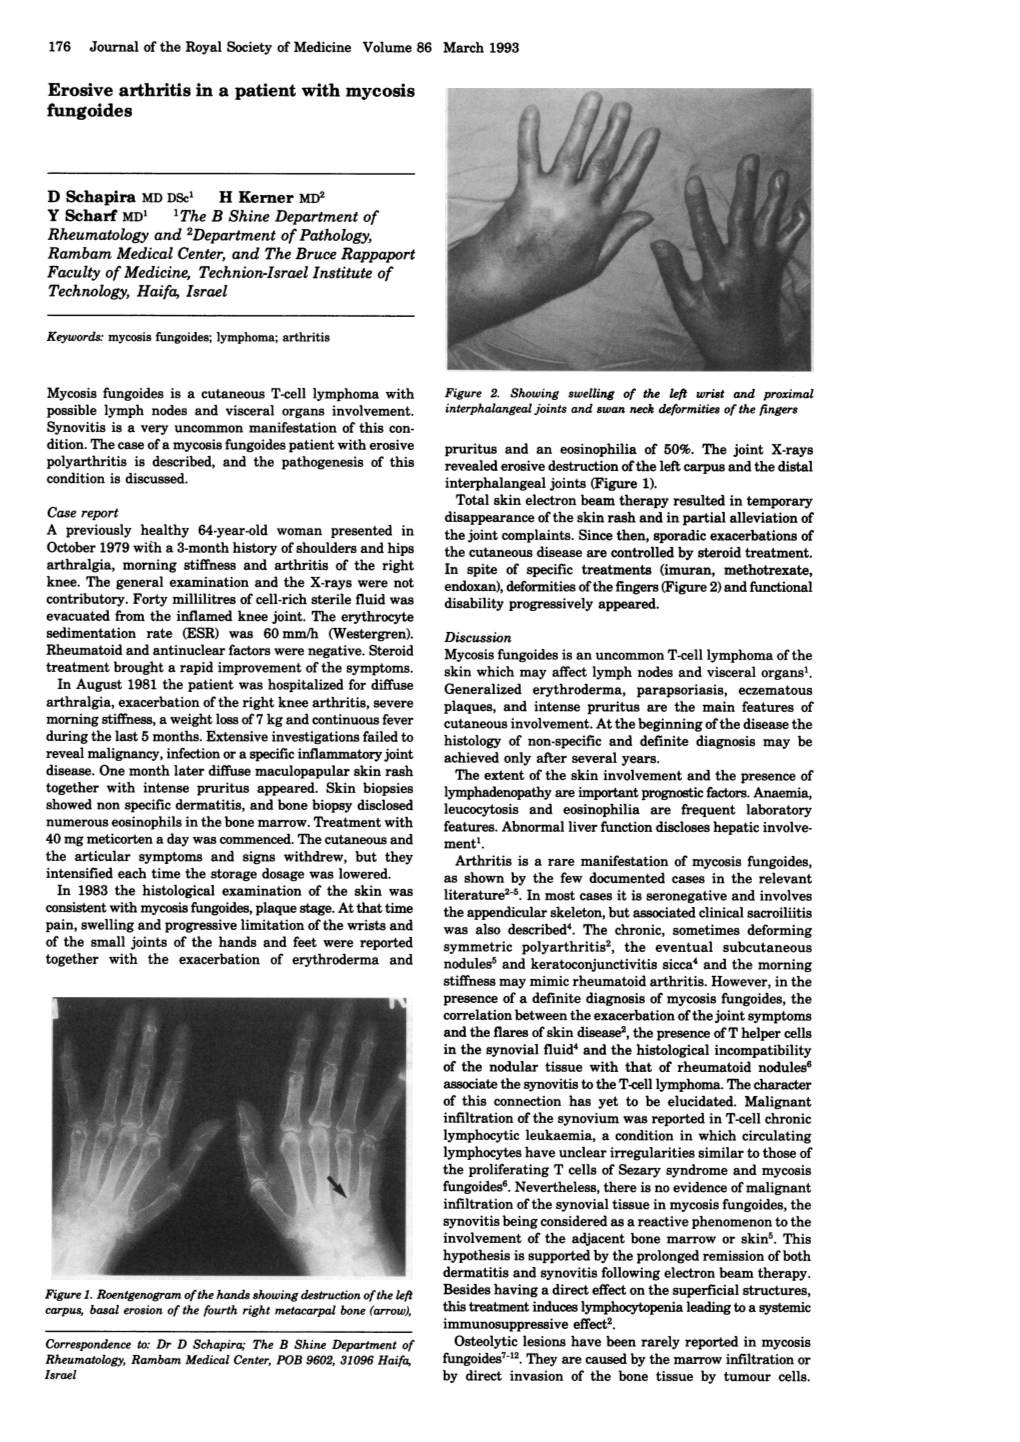 Erosive Arthritis in a Patient with Mycosis Fungoides